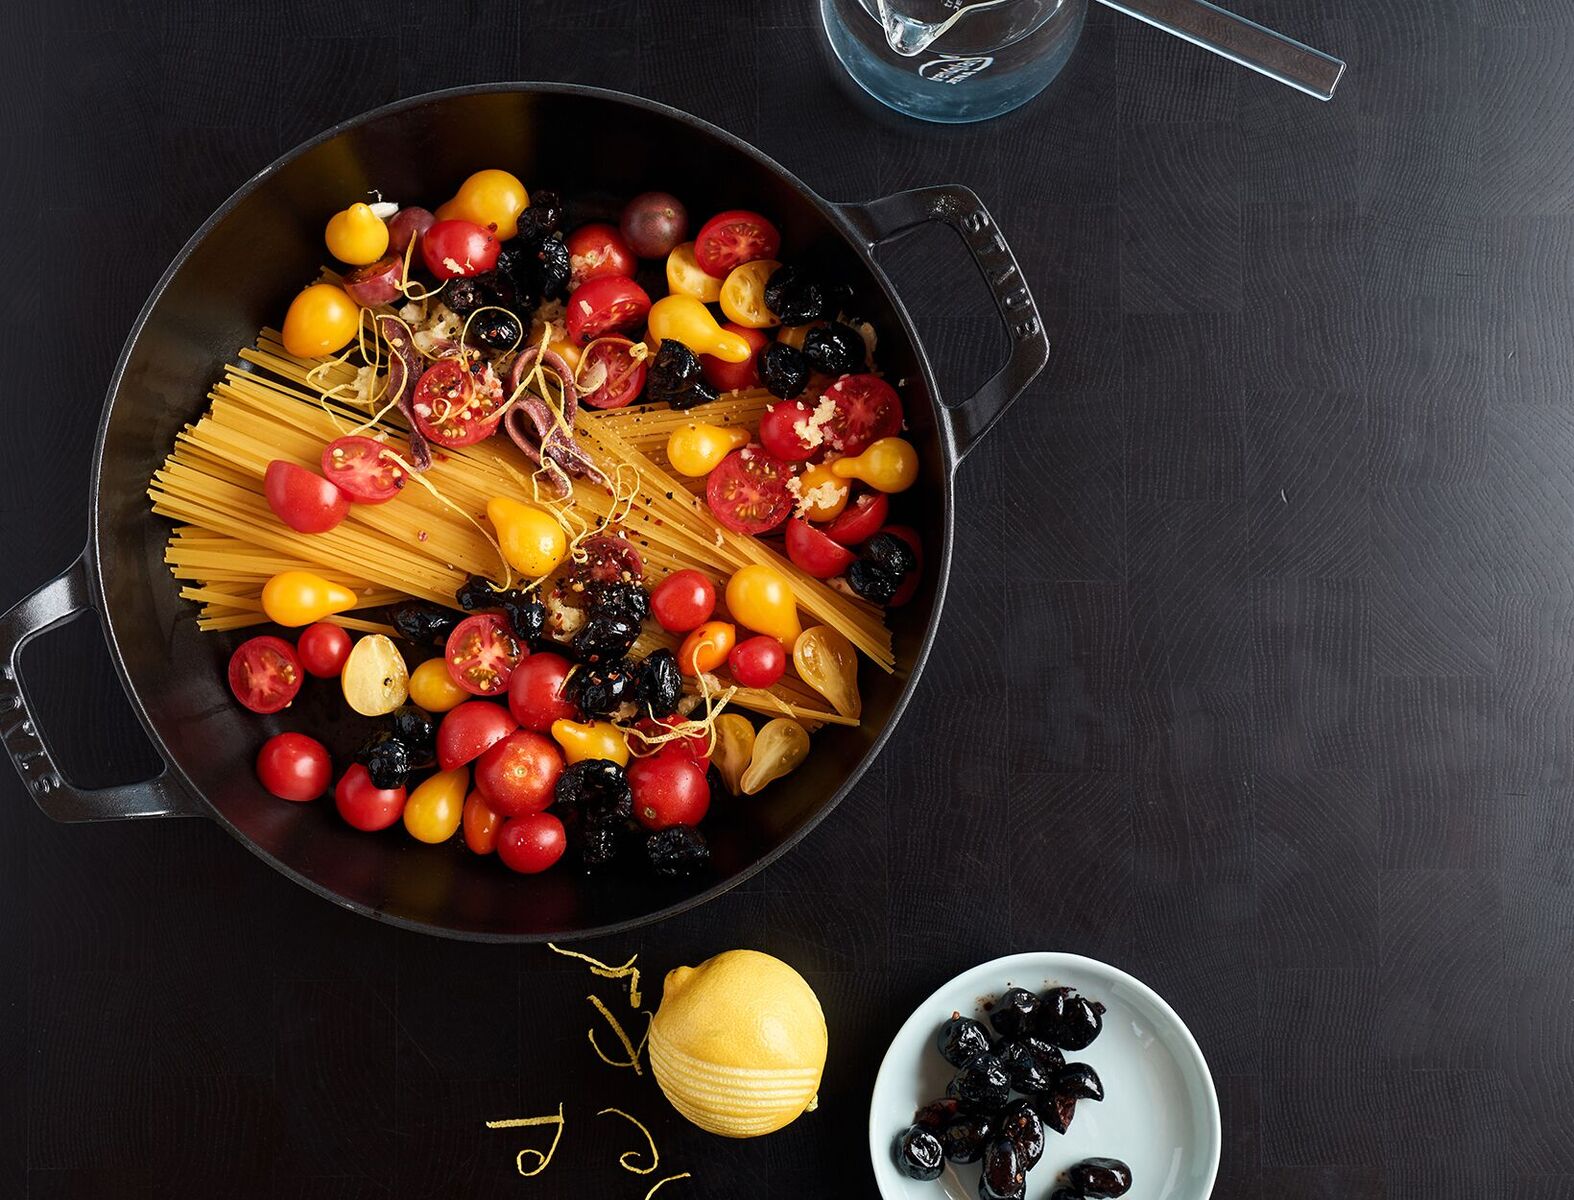 Spaghetti with Cherry Tomatoes, Olives, and Lemon